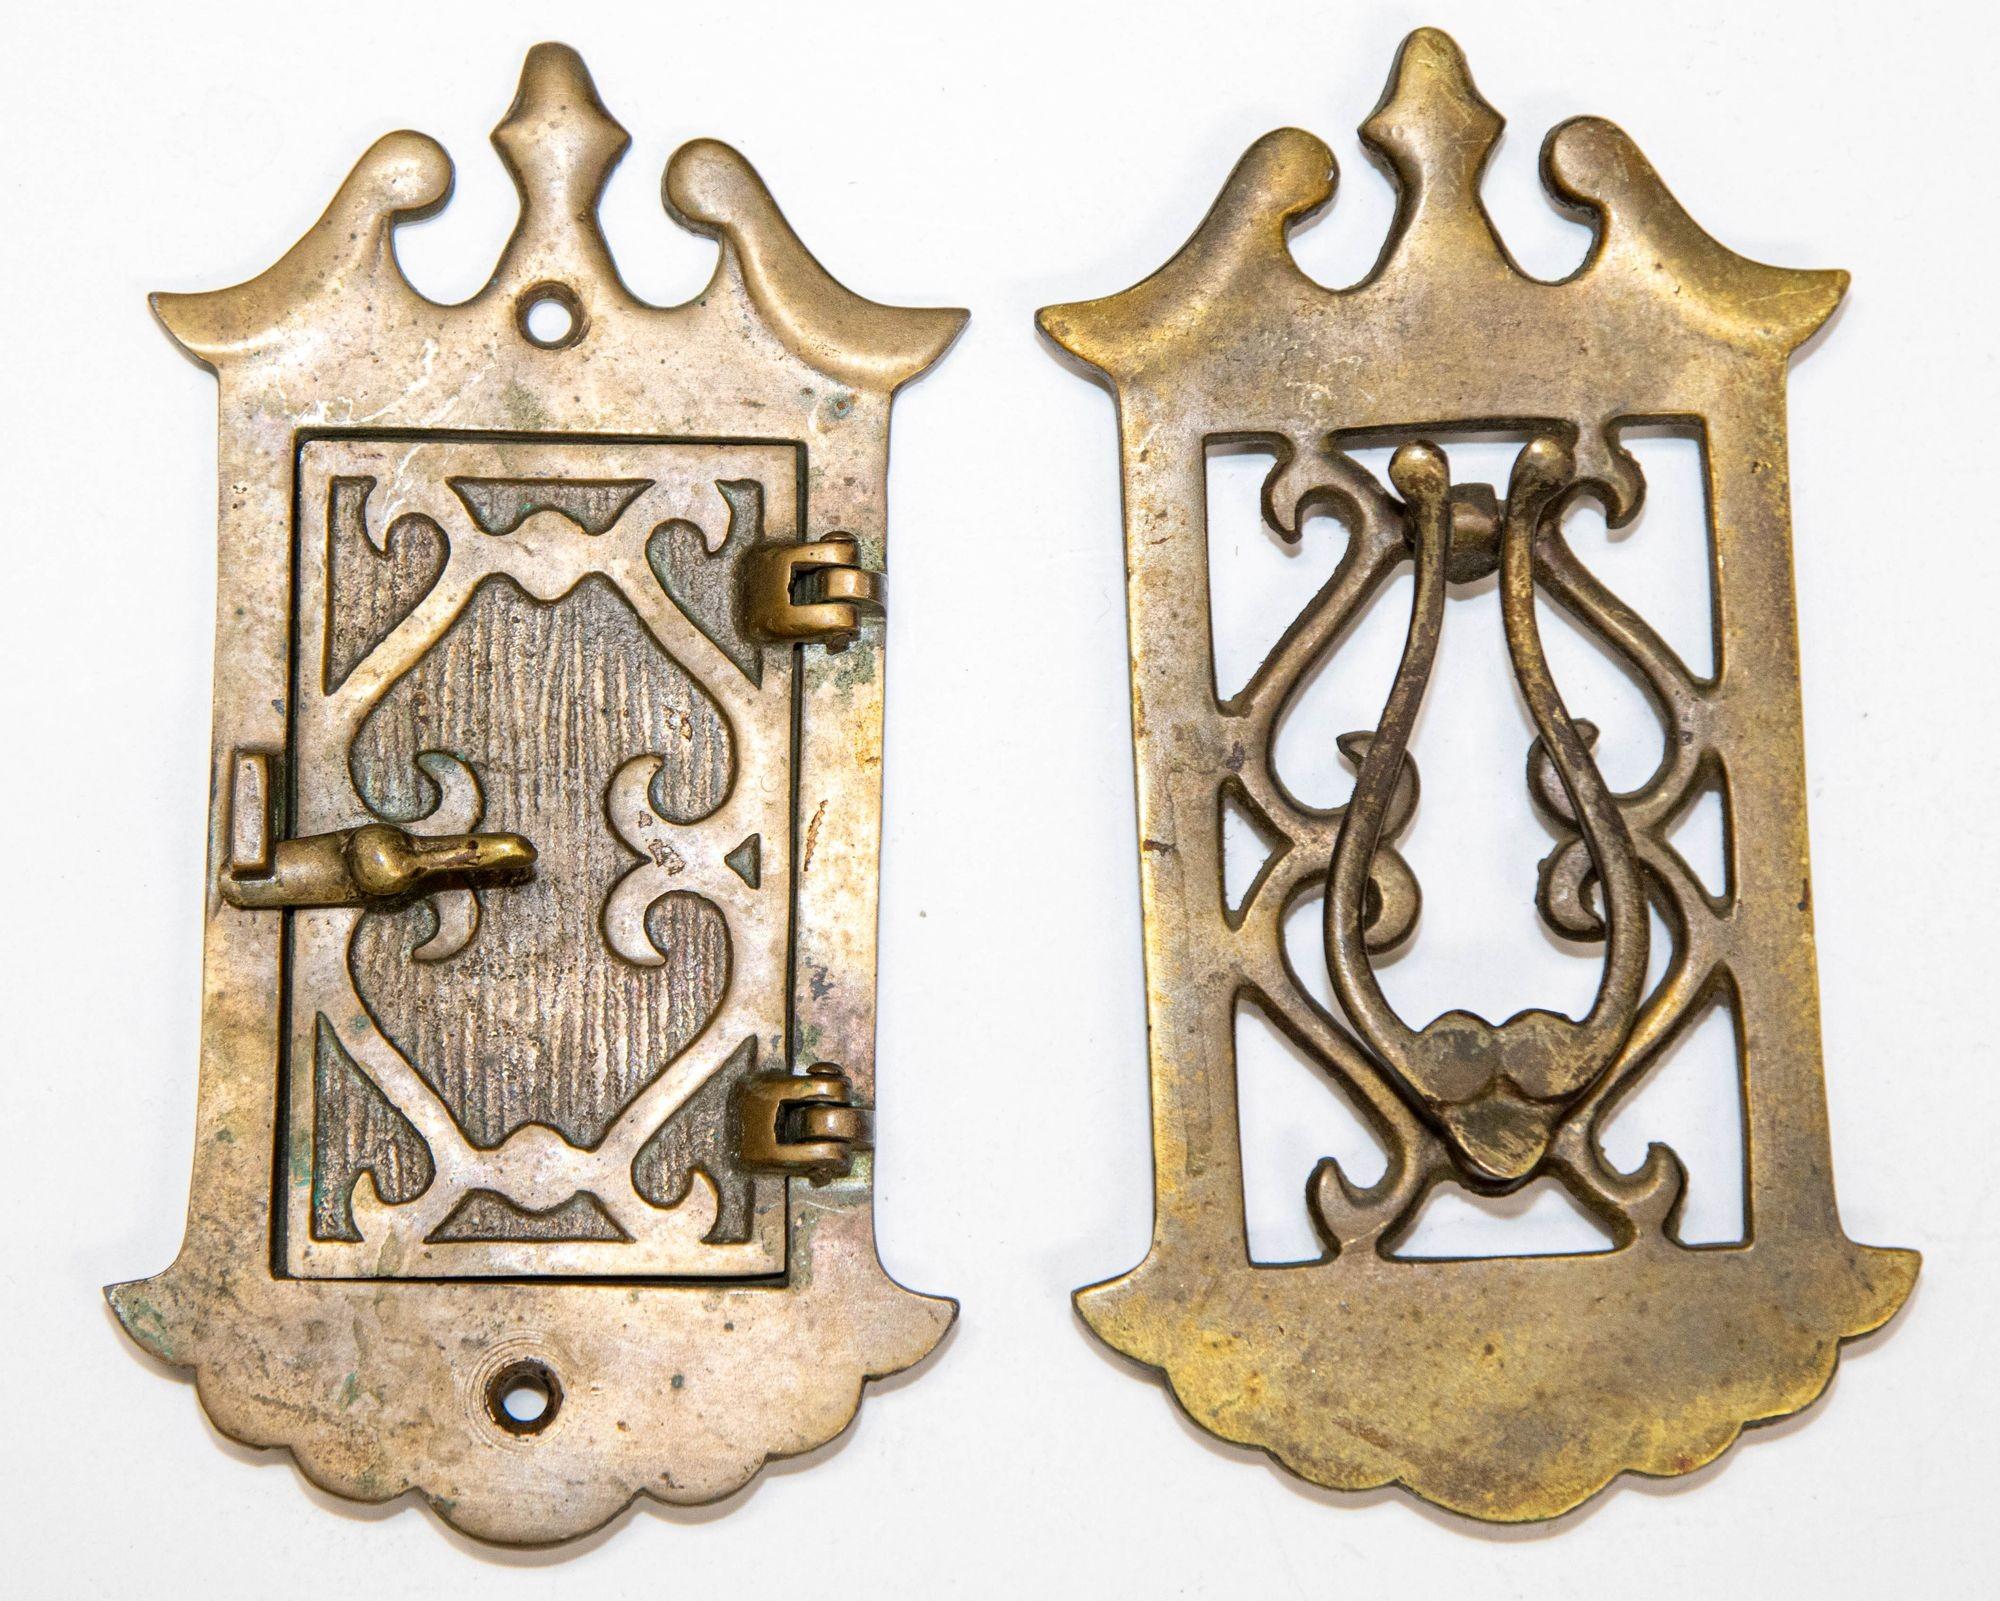 Antique Speakeasy Door Knocker Viewer and Peephole Grill in Two Panels.
Art Deco, Victorian, Chippendale style Speakeasy or Door Viewer. 
A two panel speakeasy door knocker and grill with a large inner peephole of rectangular shape that opens on